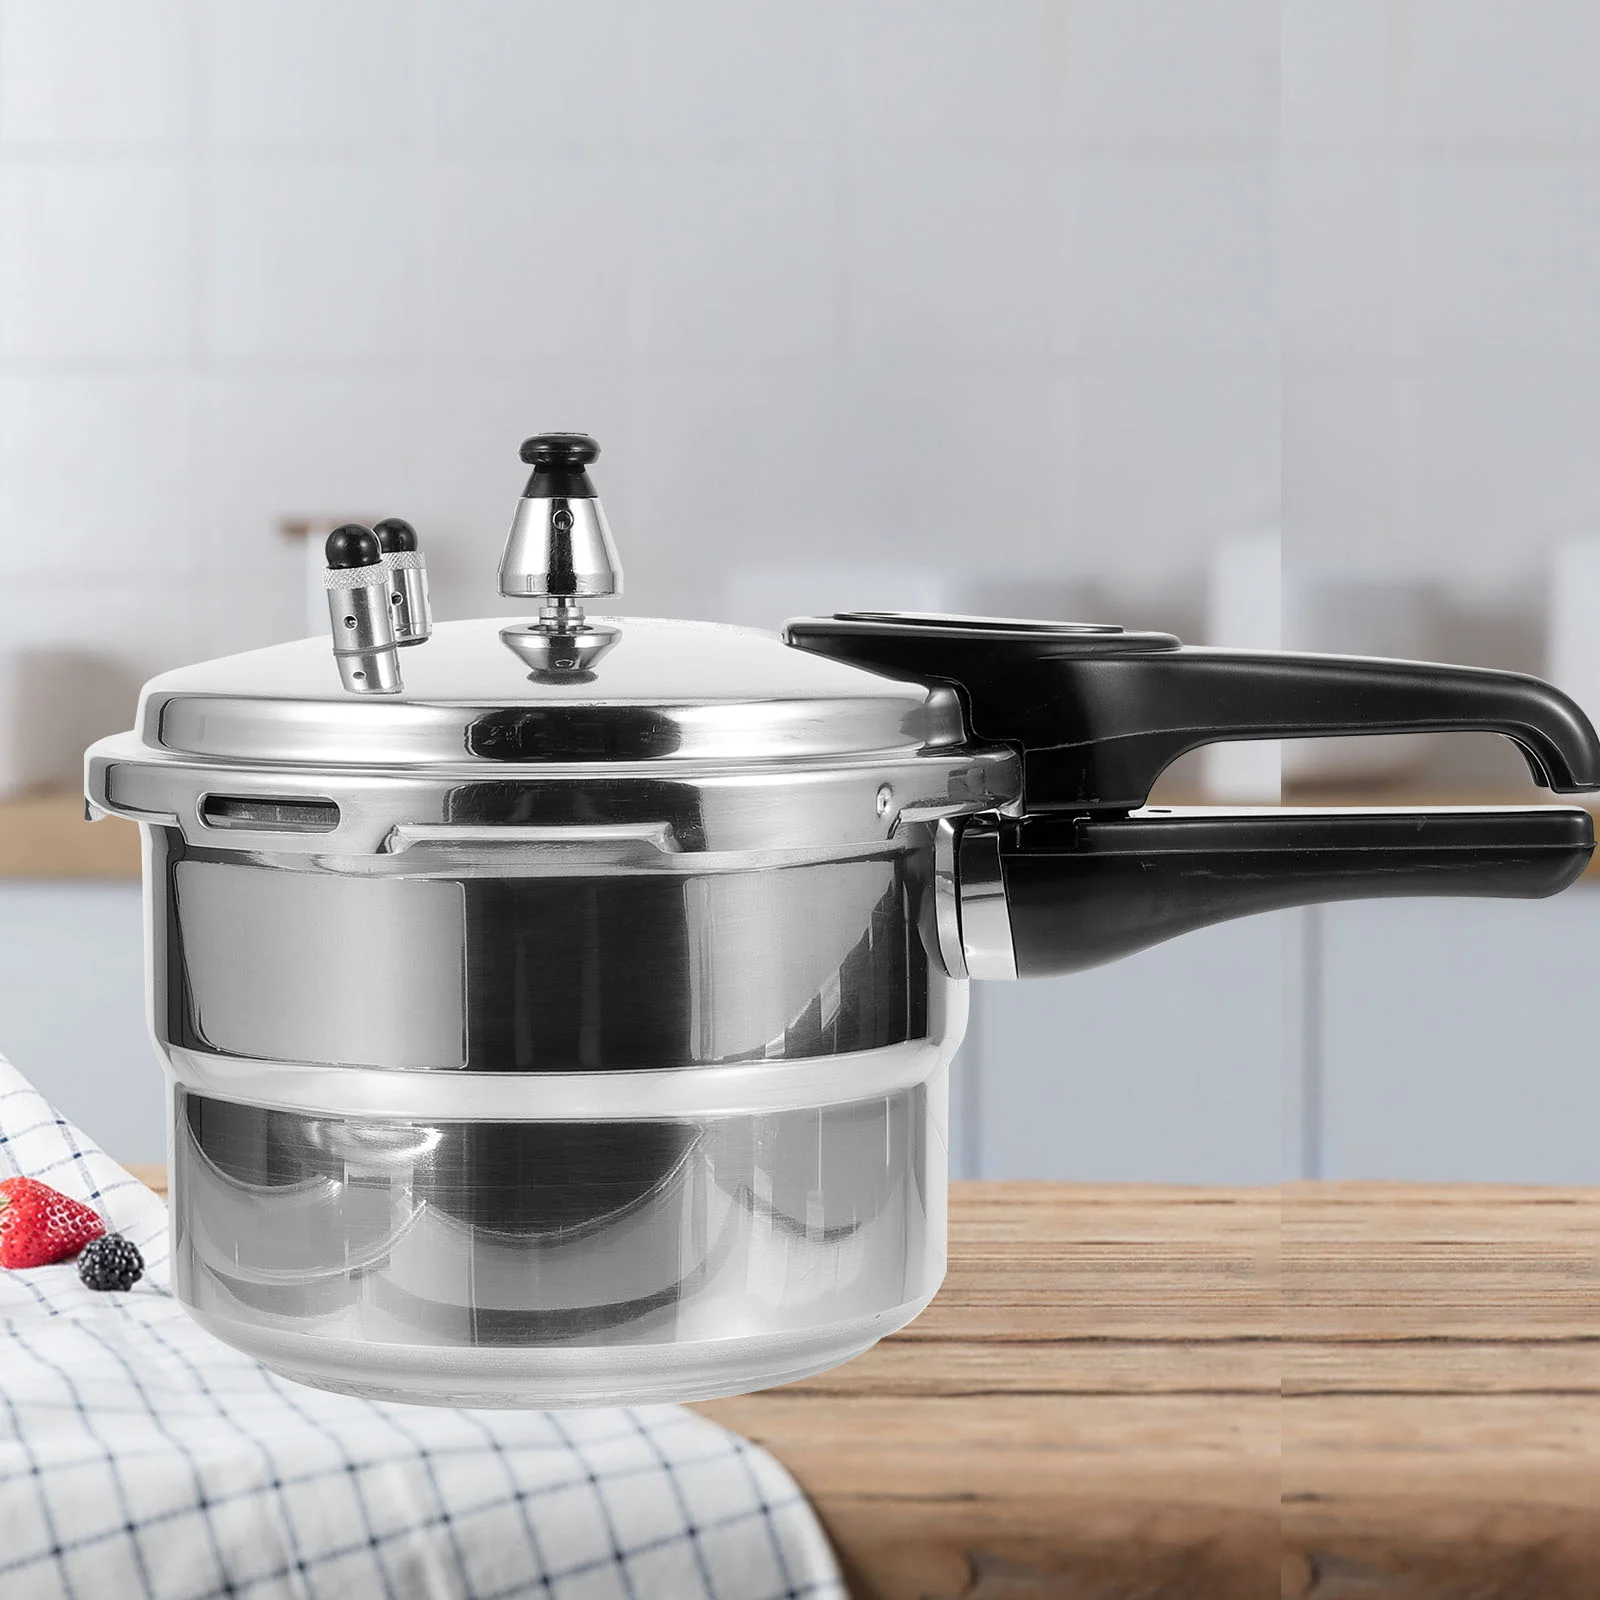 

Stainless Steel Pressure Cooker Pot Canning Steamer Gas Stove Kitchen Canned Vegetables Large Instant Safe Top